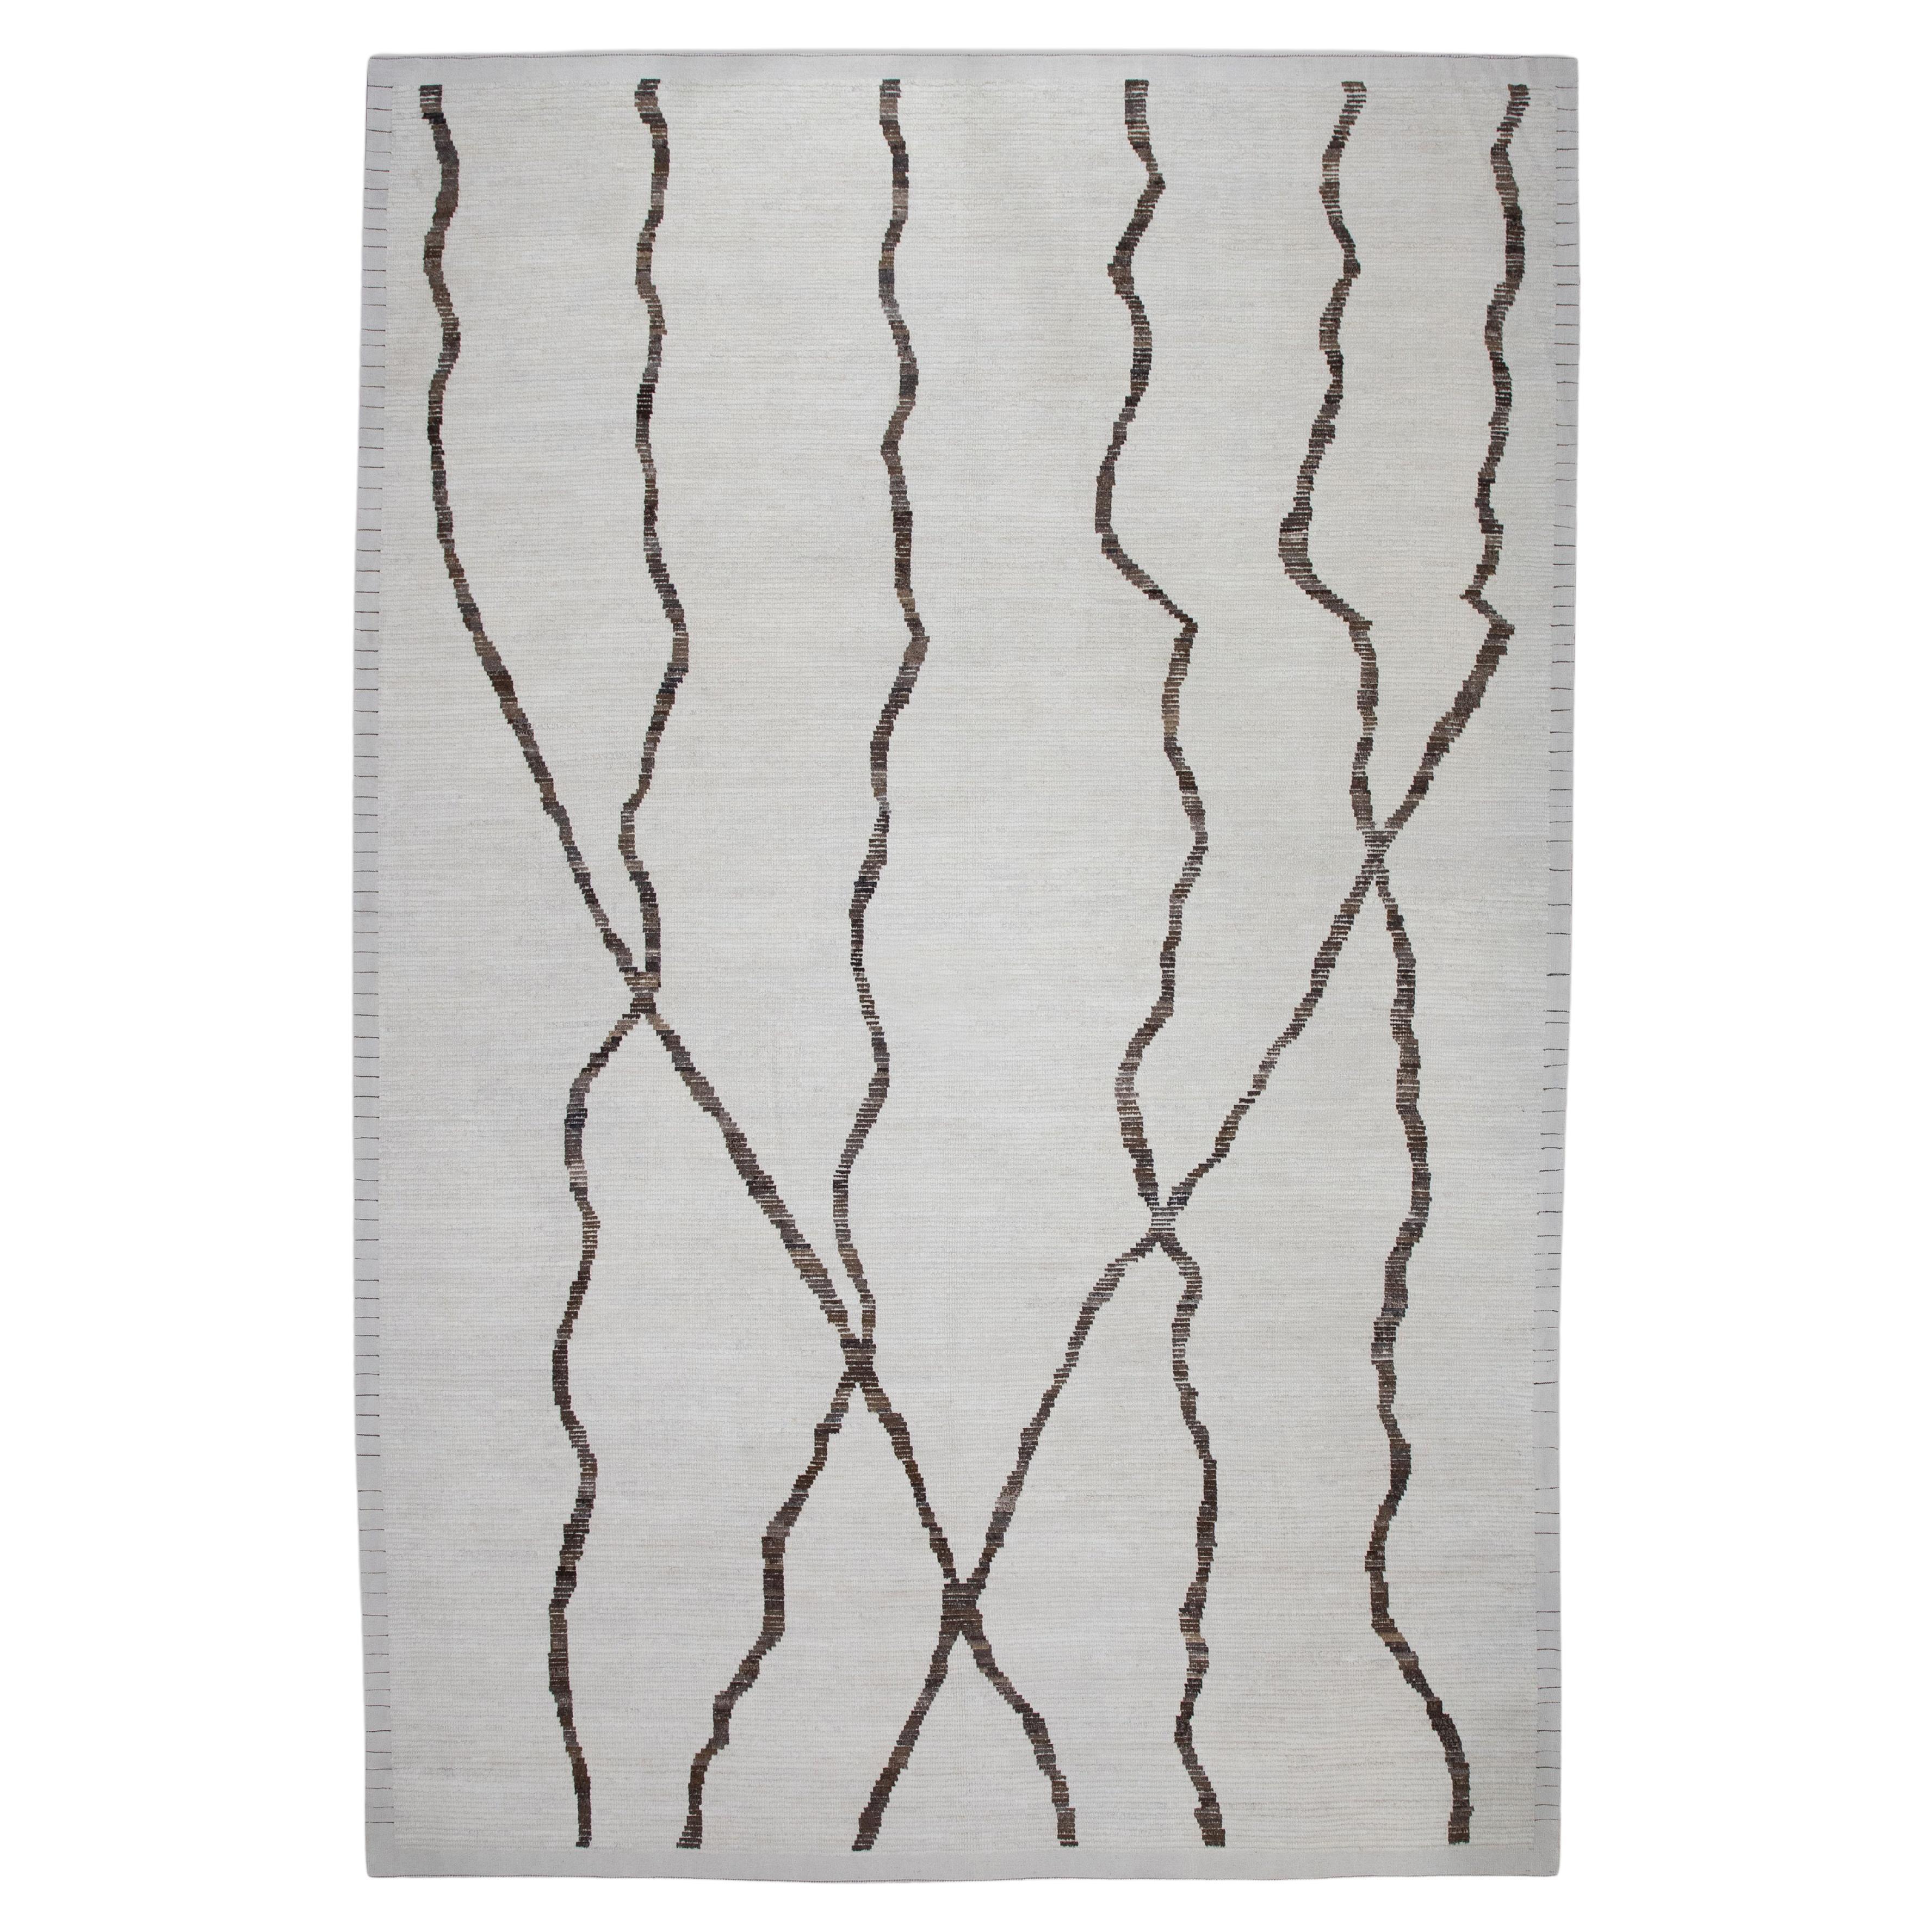 21st Century Modern Moroccan Style Wool Rug in Brown & Beige 9'10" X 14'1" For Sale